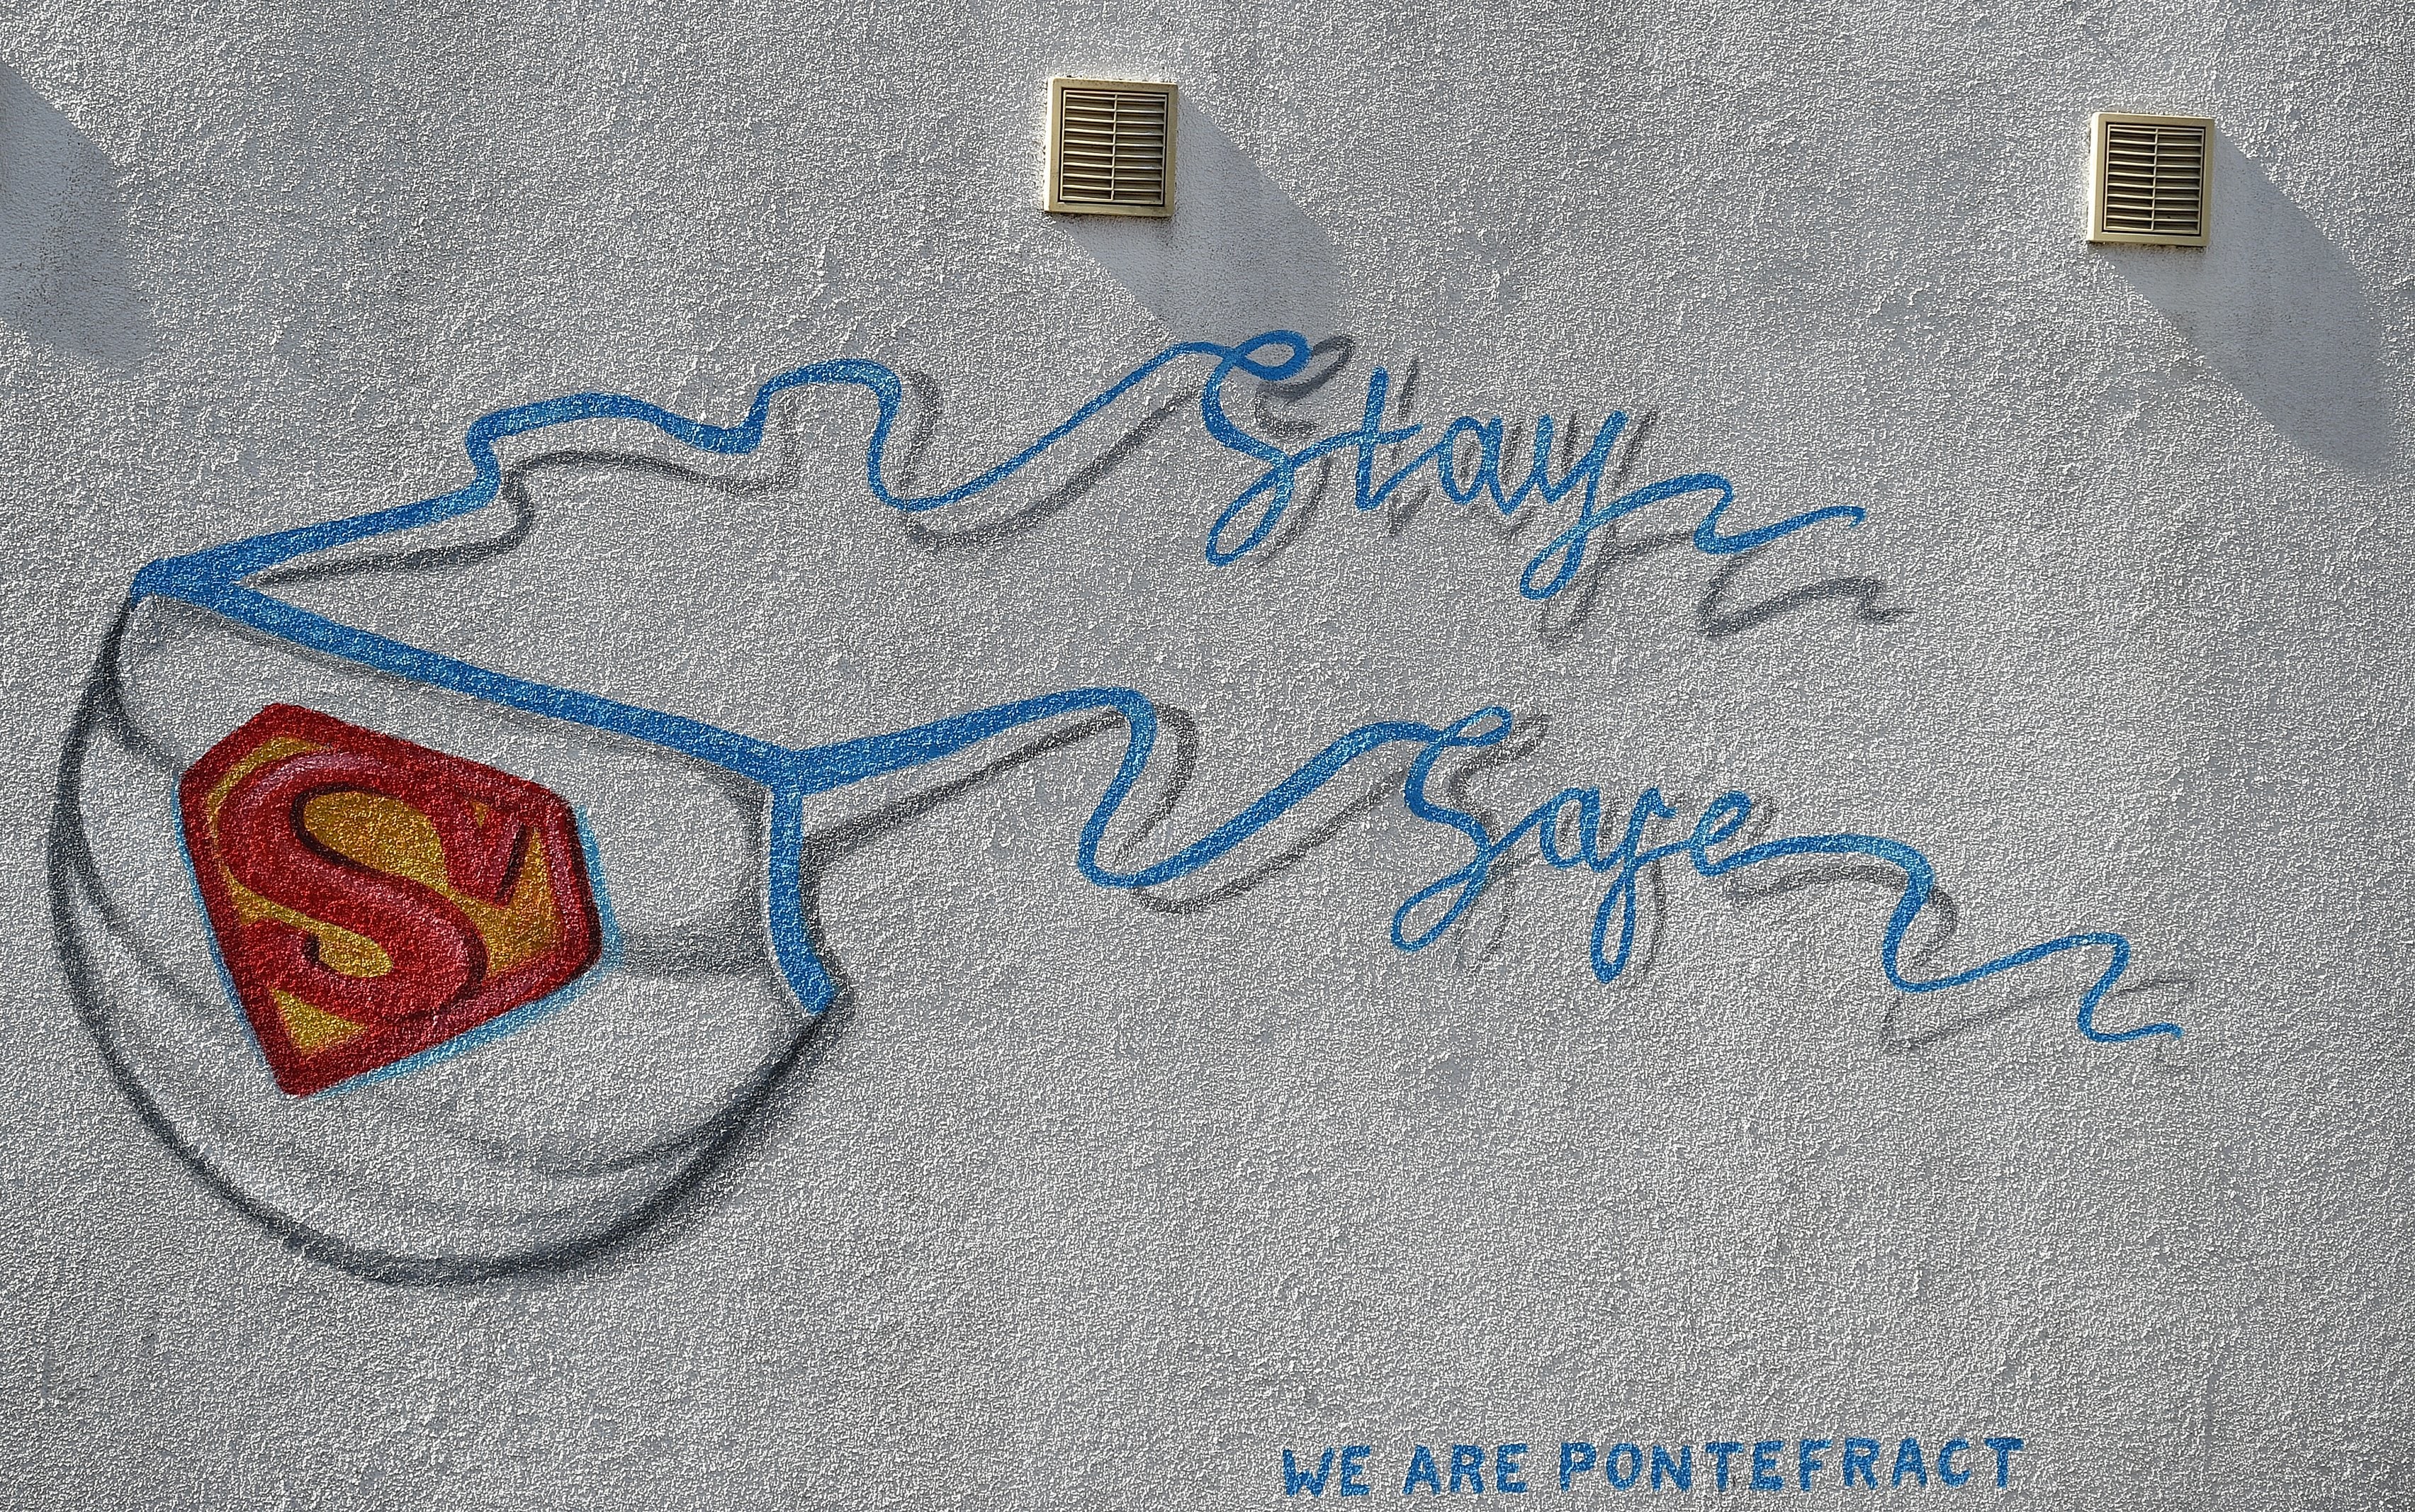 Graffiti depicting the badge of Superman and Superwoman, and forming a mask with the words "Stay Safe", on a wall in northern England on April 14, 2020.